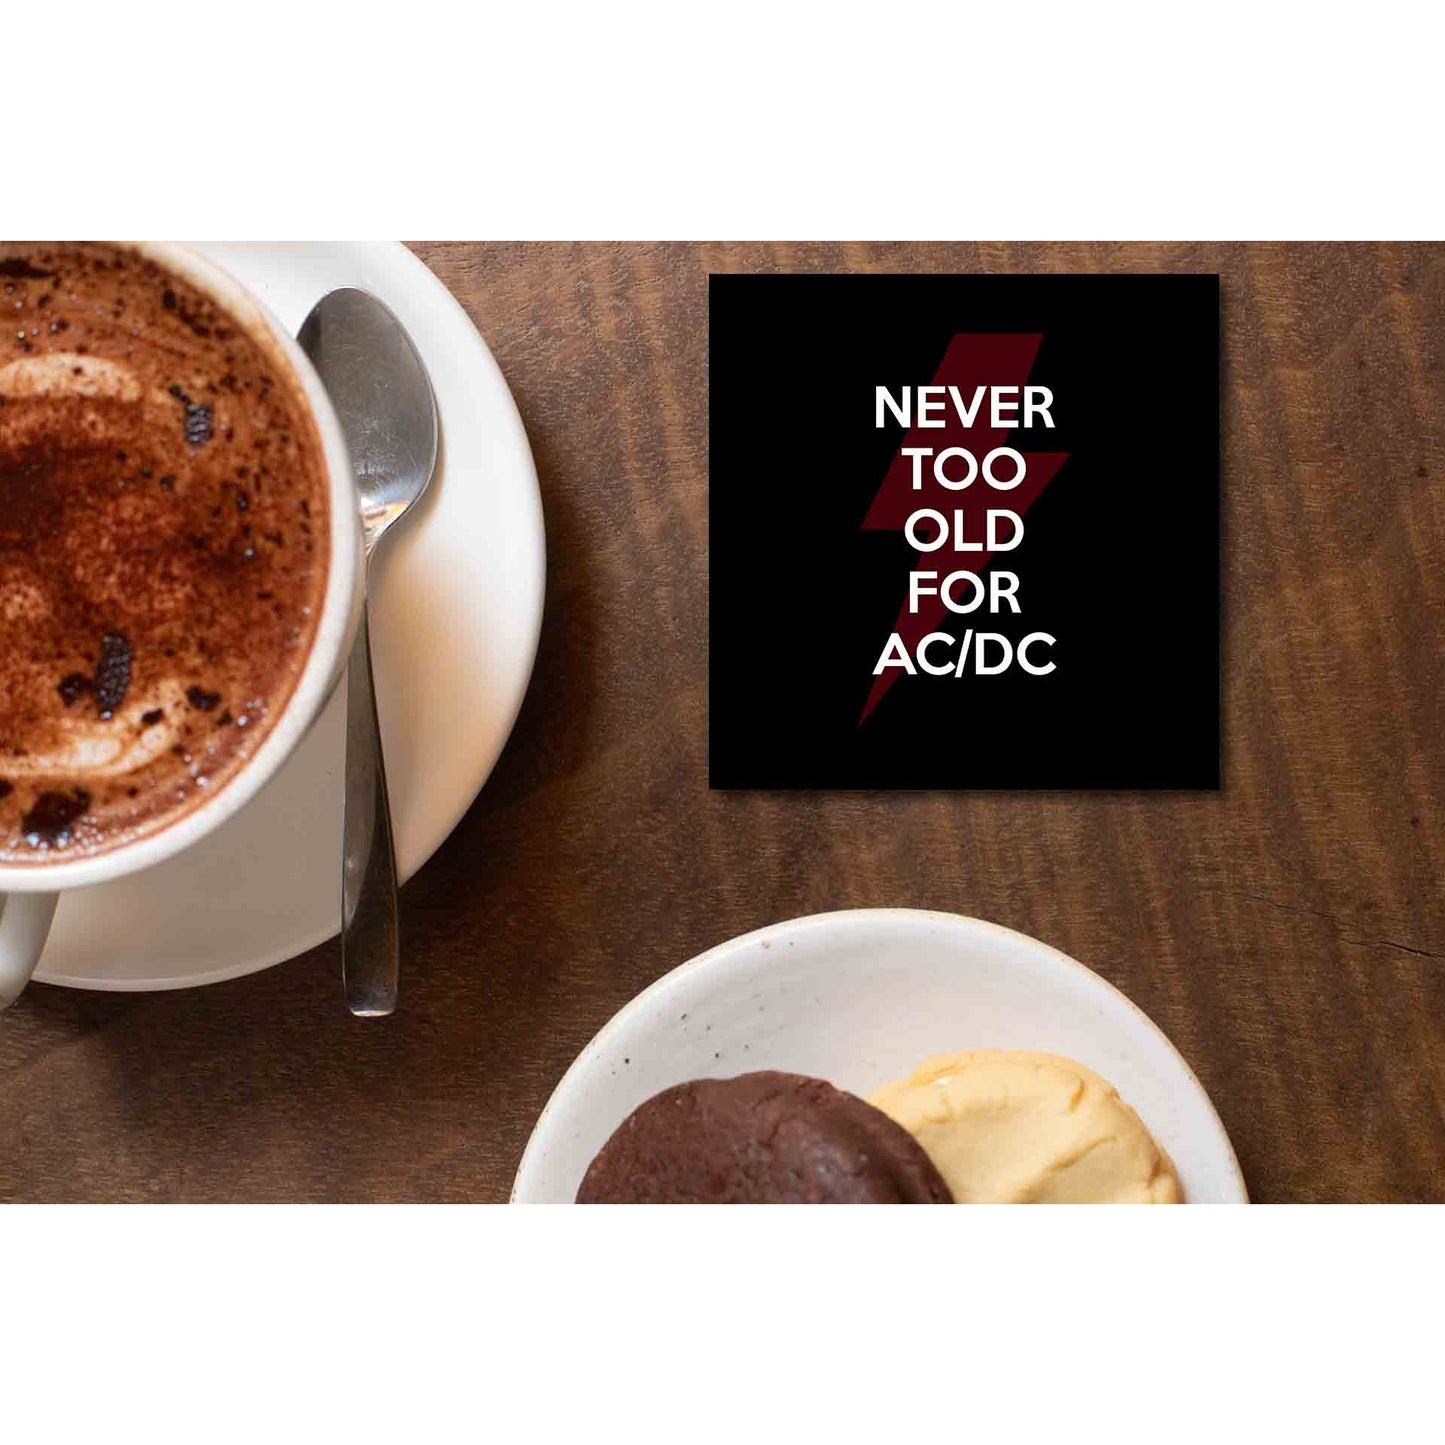 ac/dc never too old for ac/dc coasters wooden table cups indian music band buy online india the banyan tee tbt men women girls boys unisex